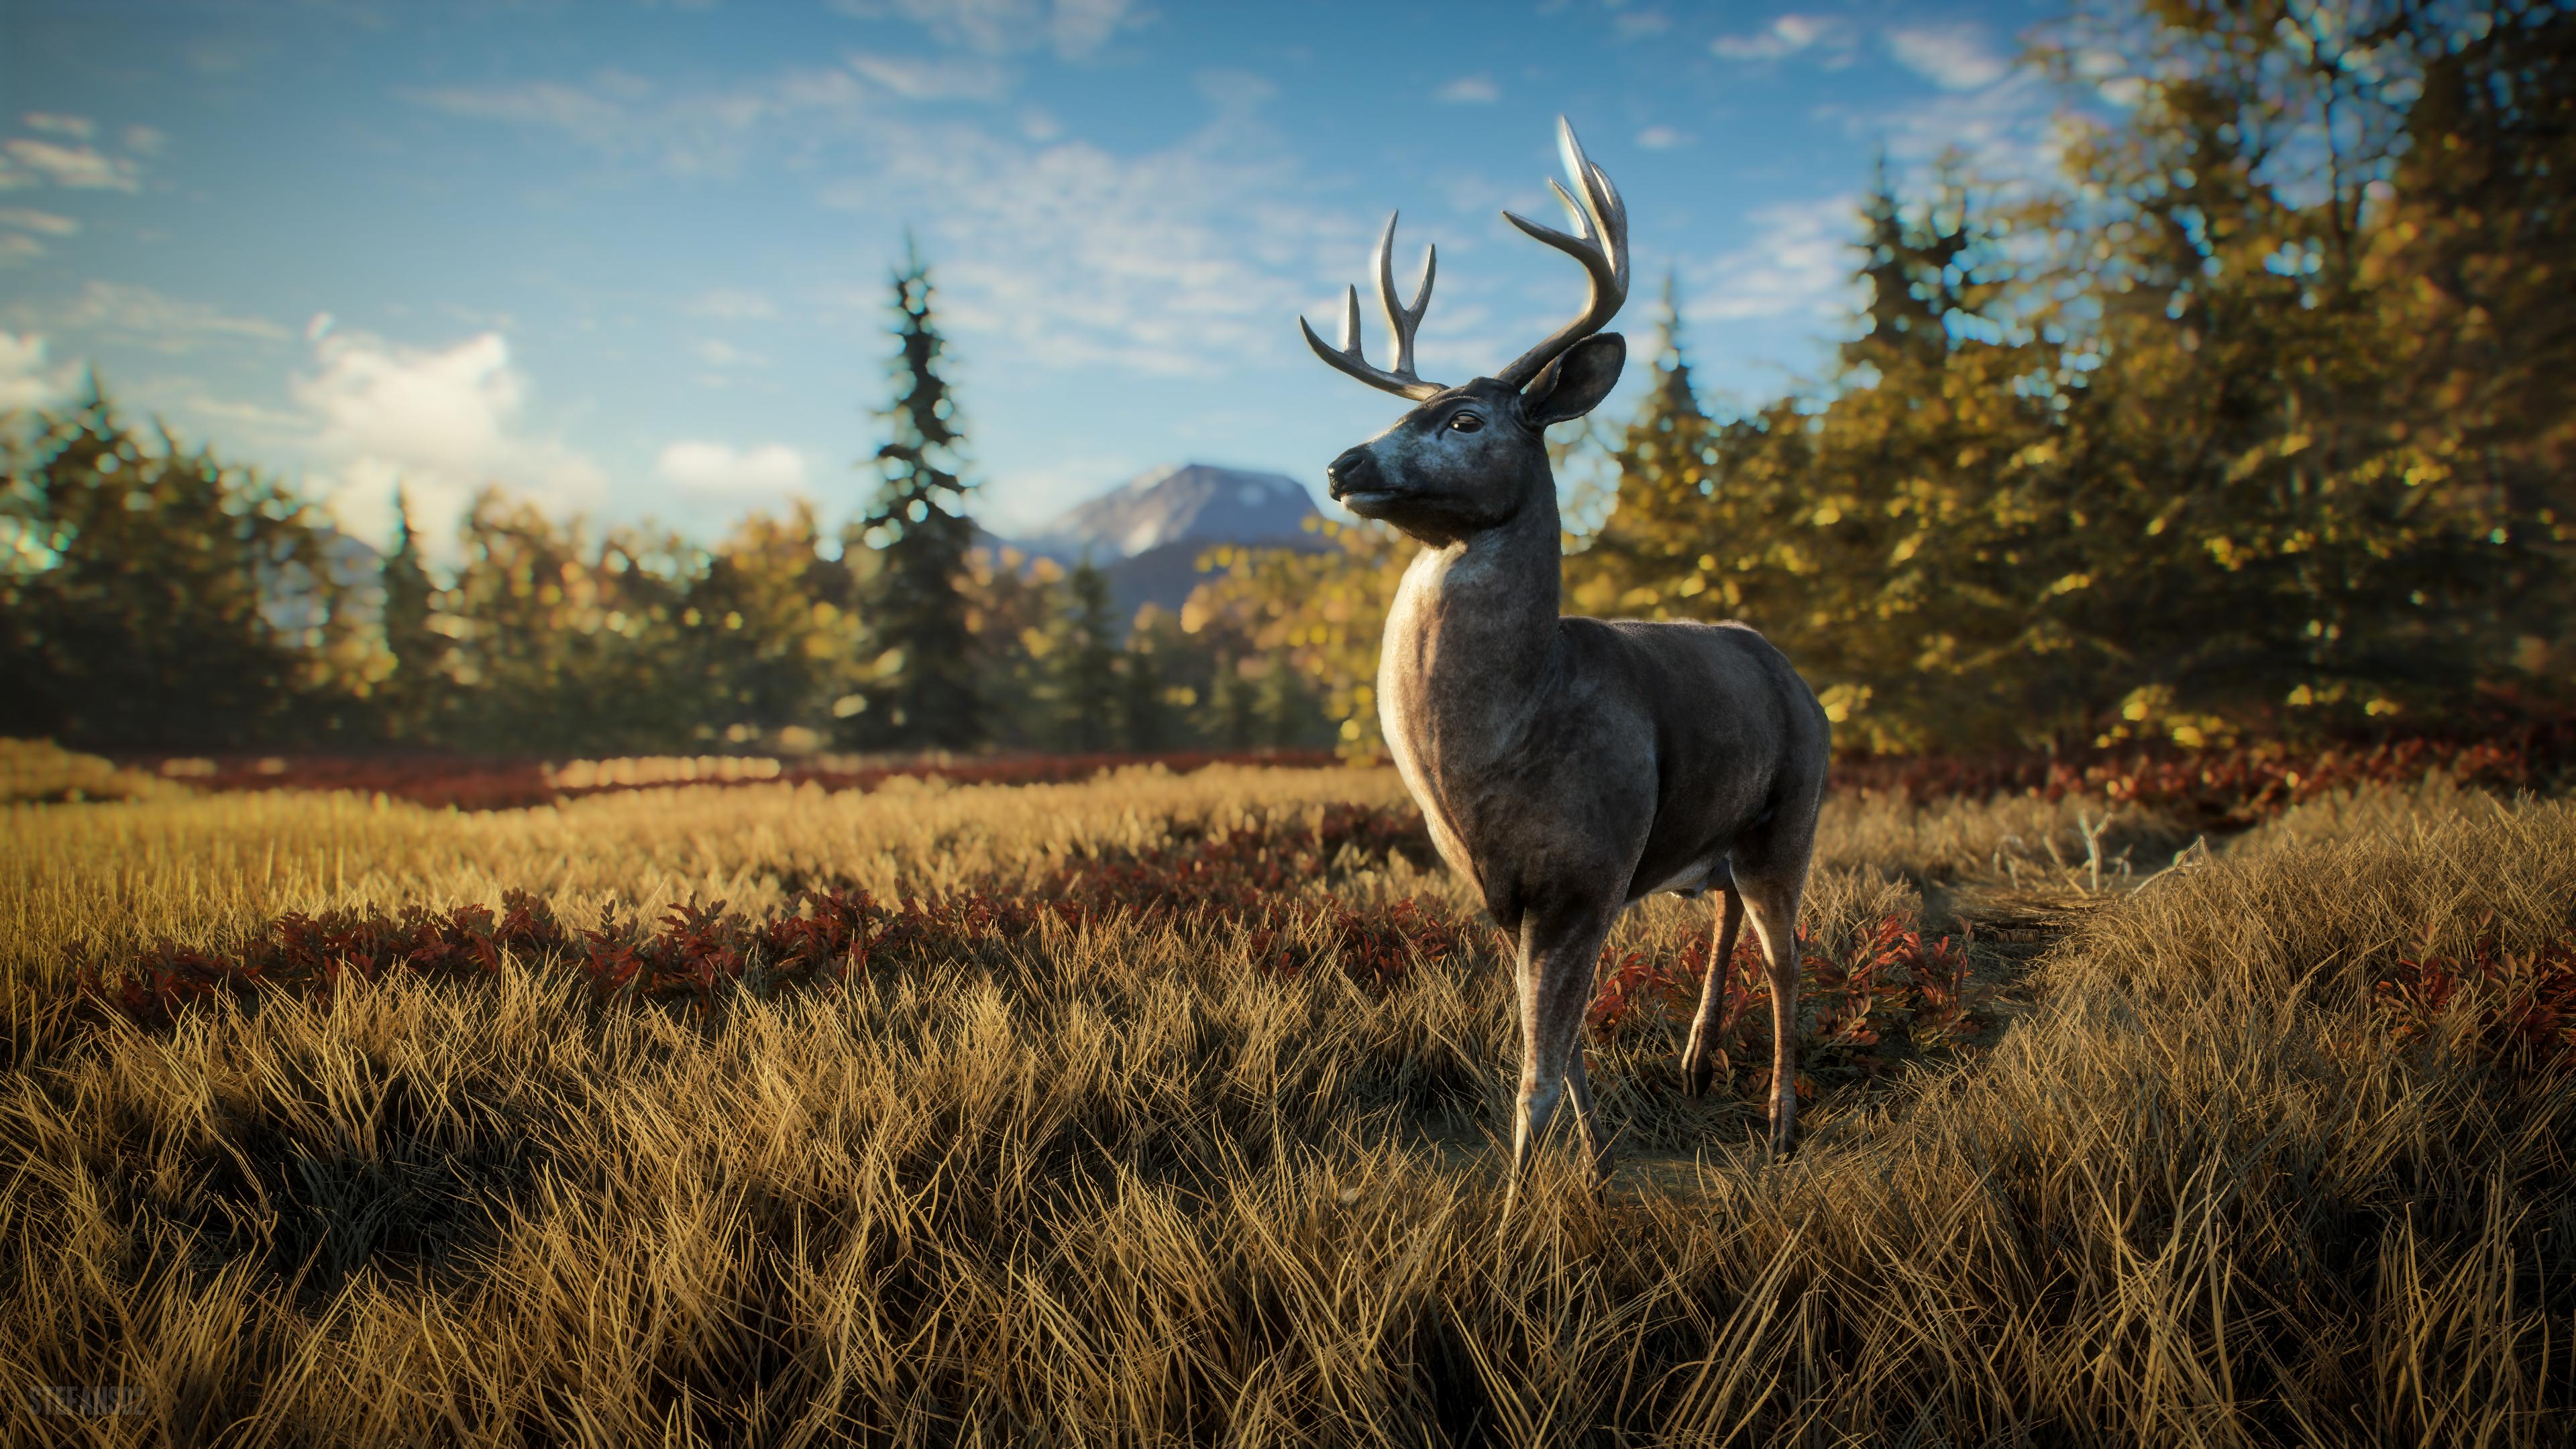 TheHunter: Call of the Wild / David the Deer is Curious 4k Ultra HD Wallpaper